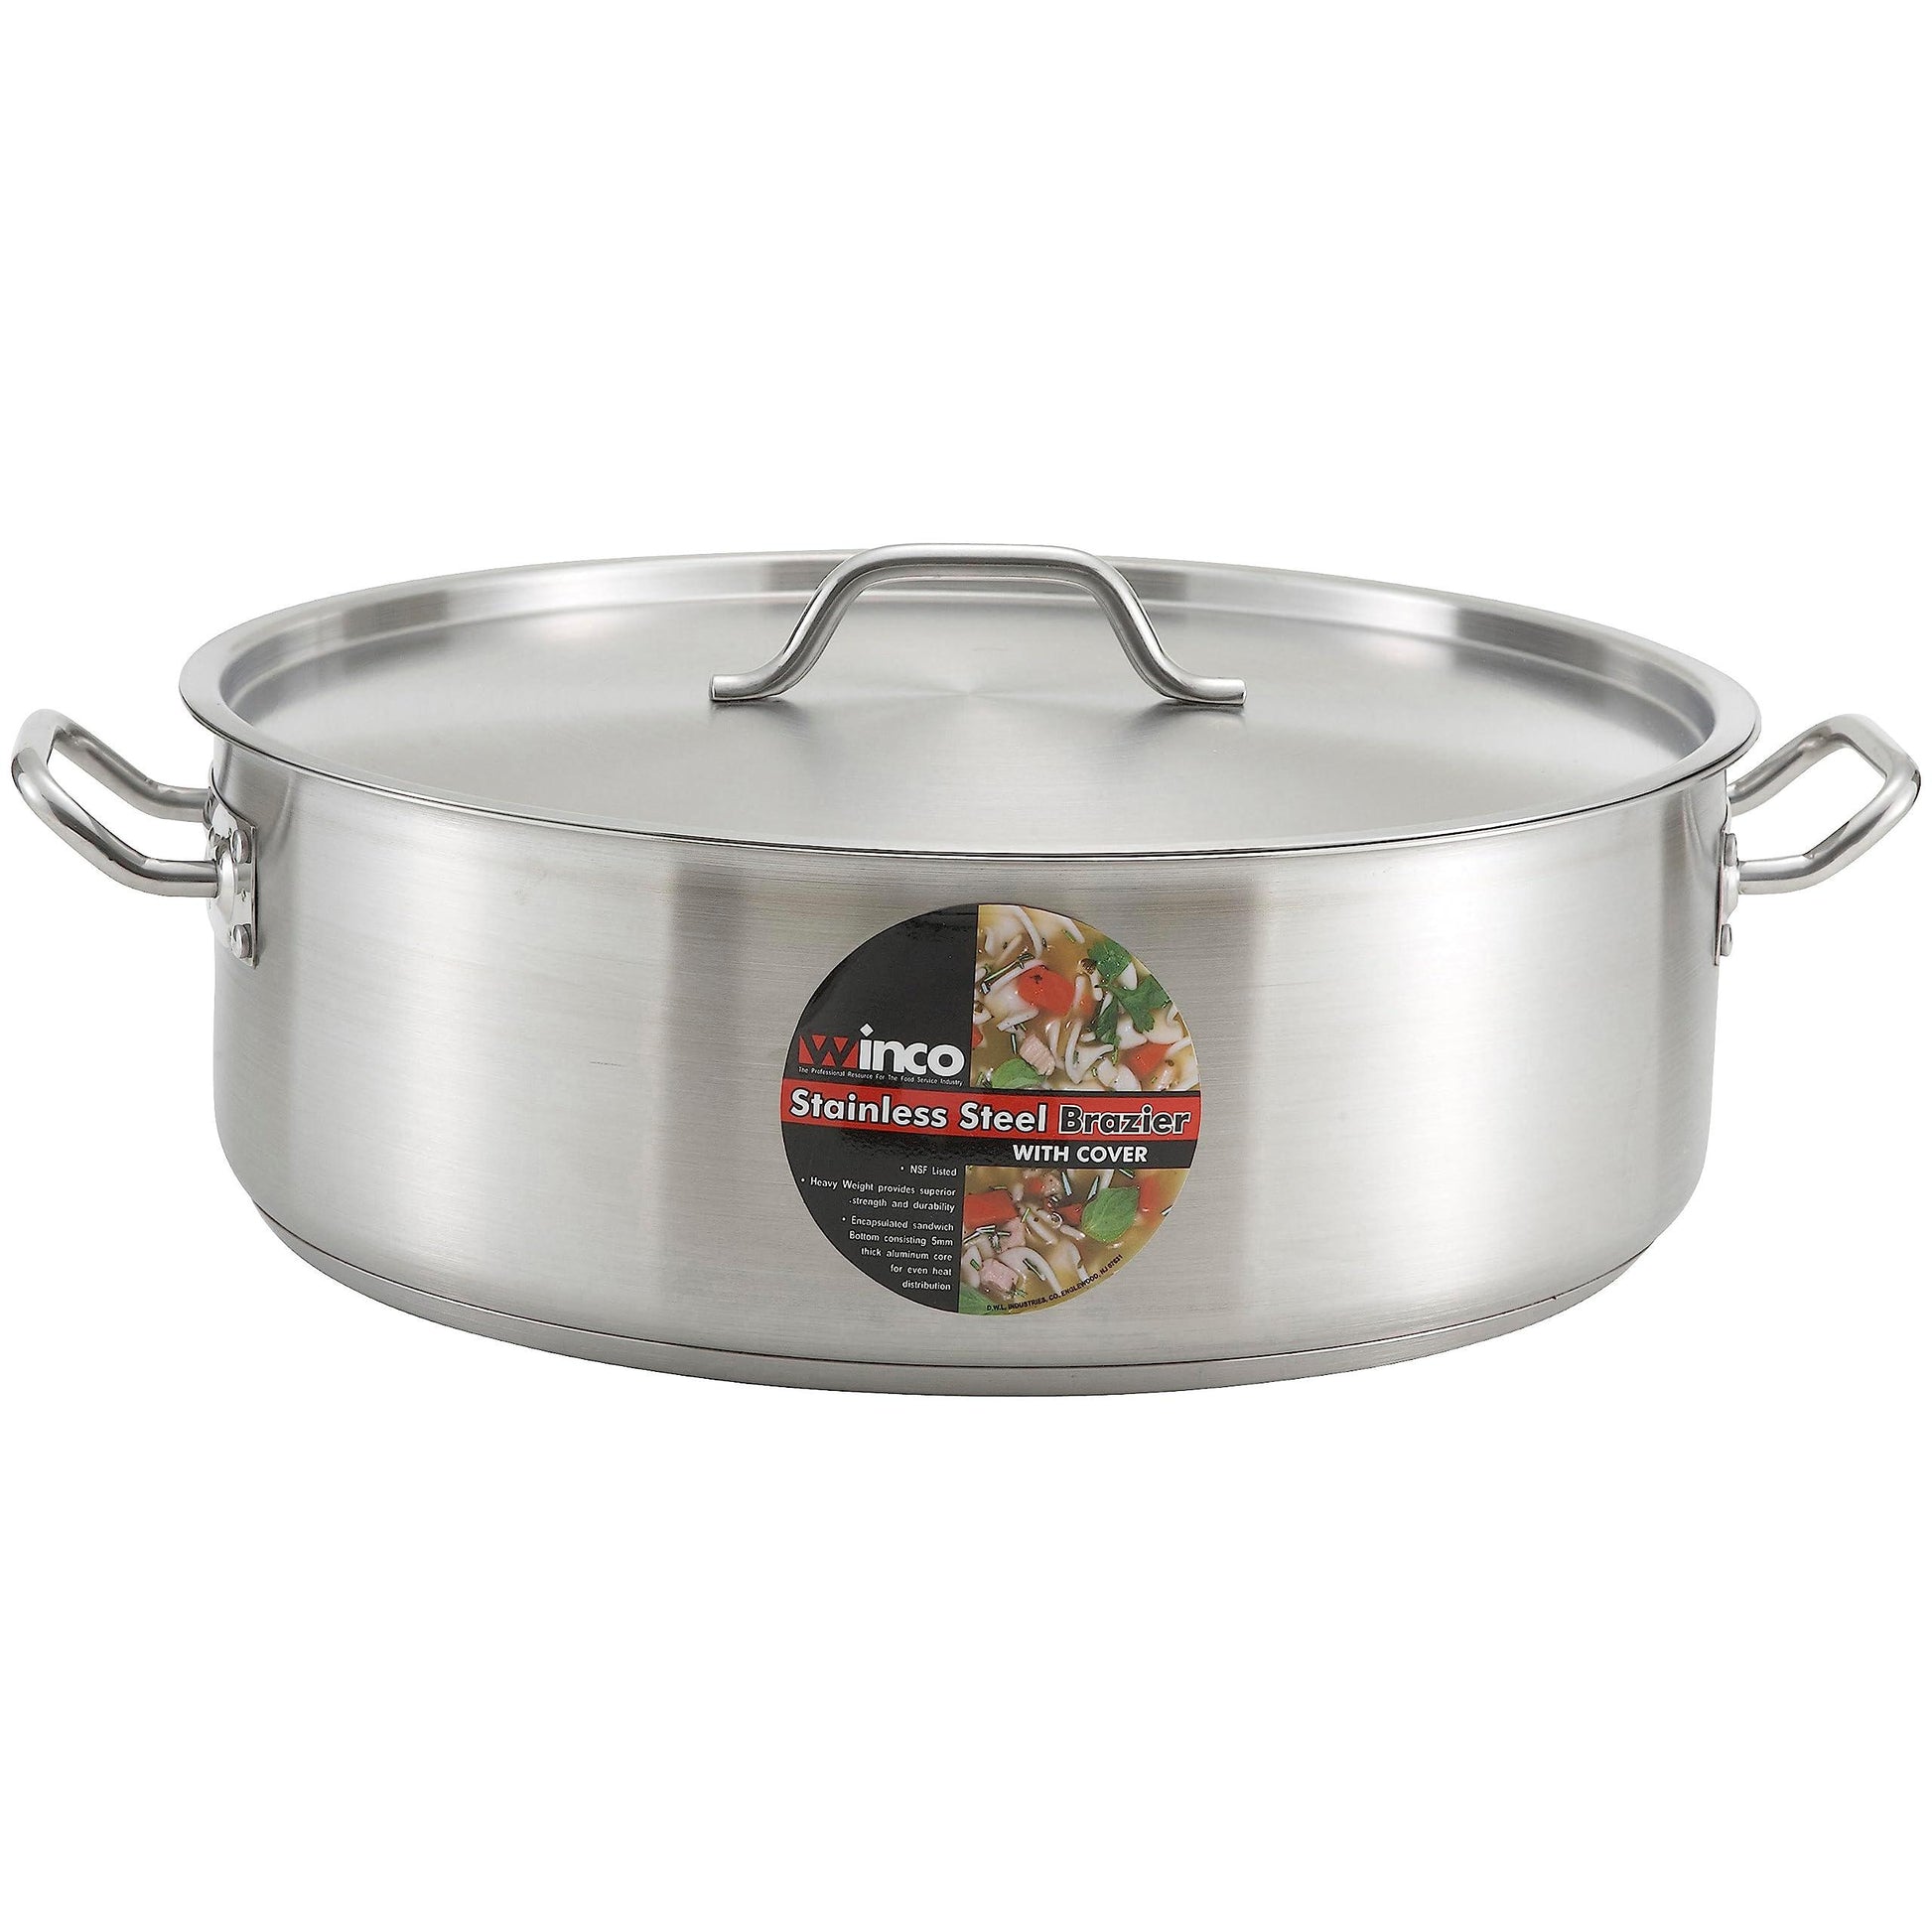 Premium Induction Brazier with Cover 10 qt. Tri-Ply Heavy Duty 18/8 Stainless Steel 11-11/16" Diameter x 5-1/2" Height - CookCave